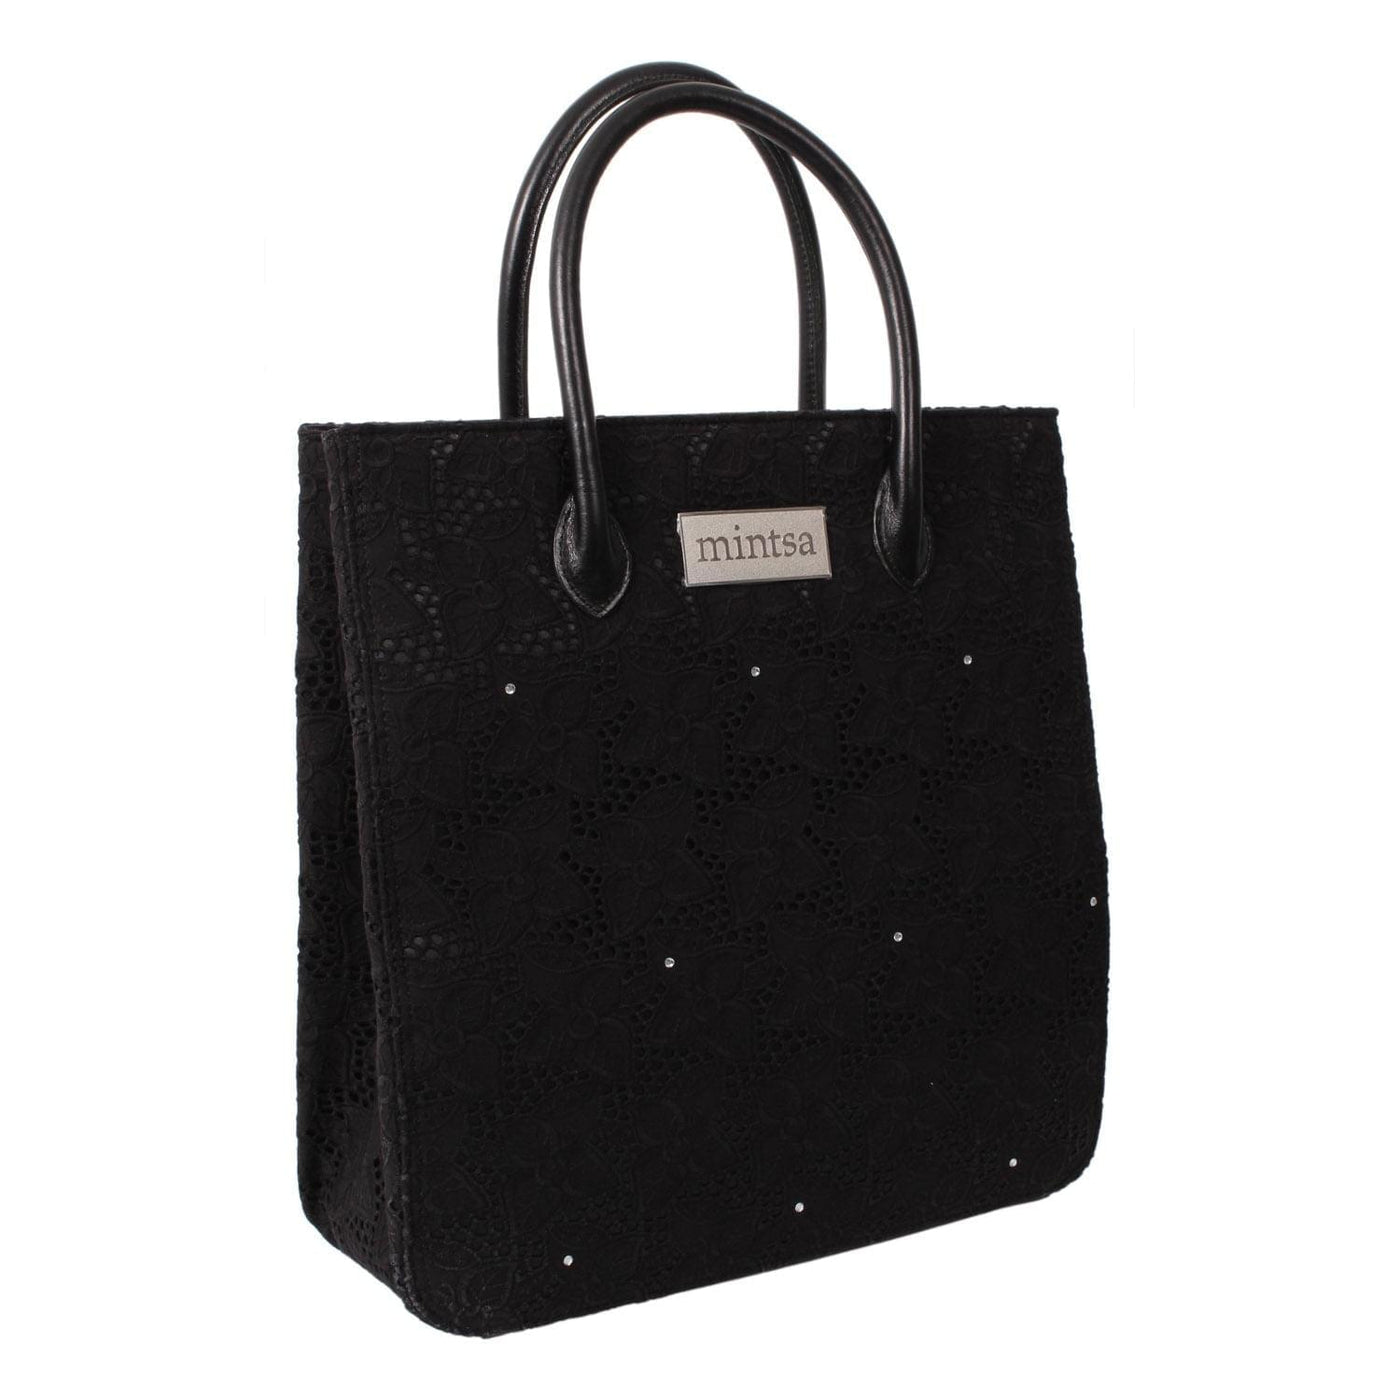 bSpecial Black Tote - Women's tote bag for everyday use